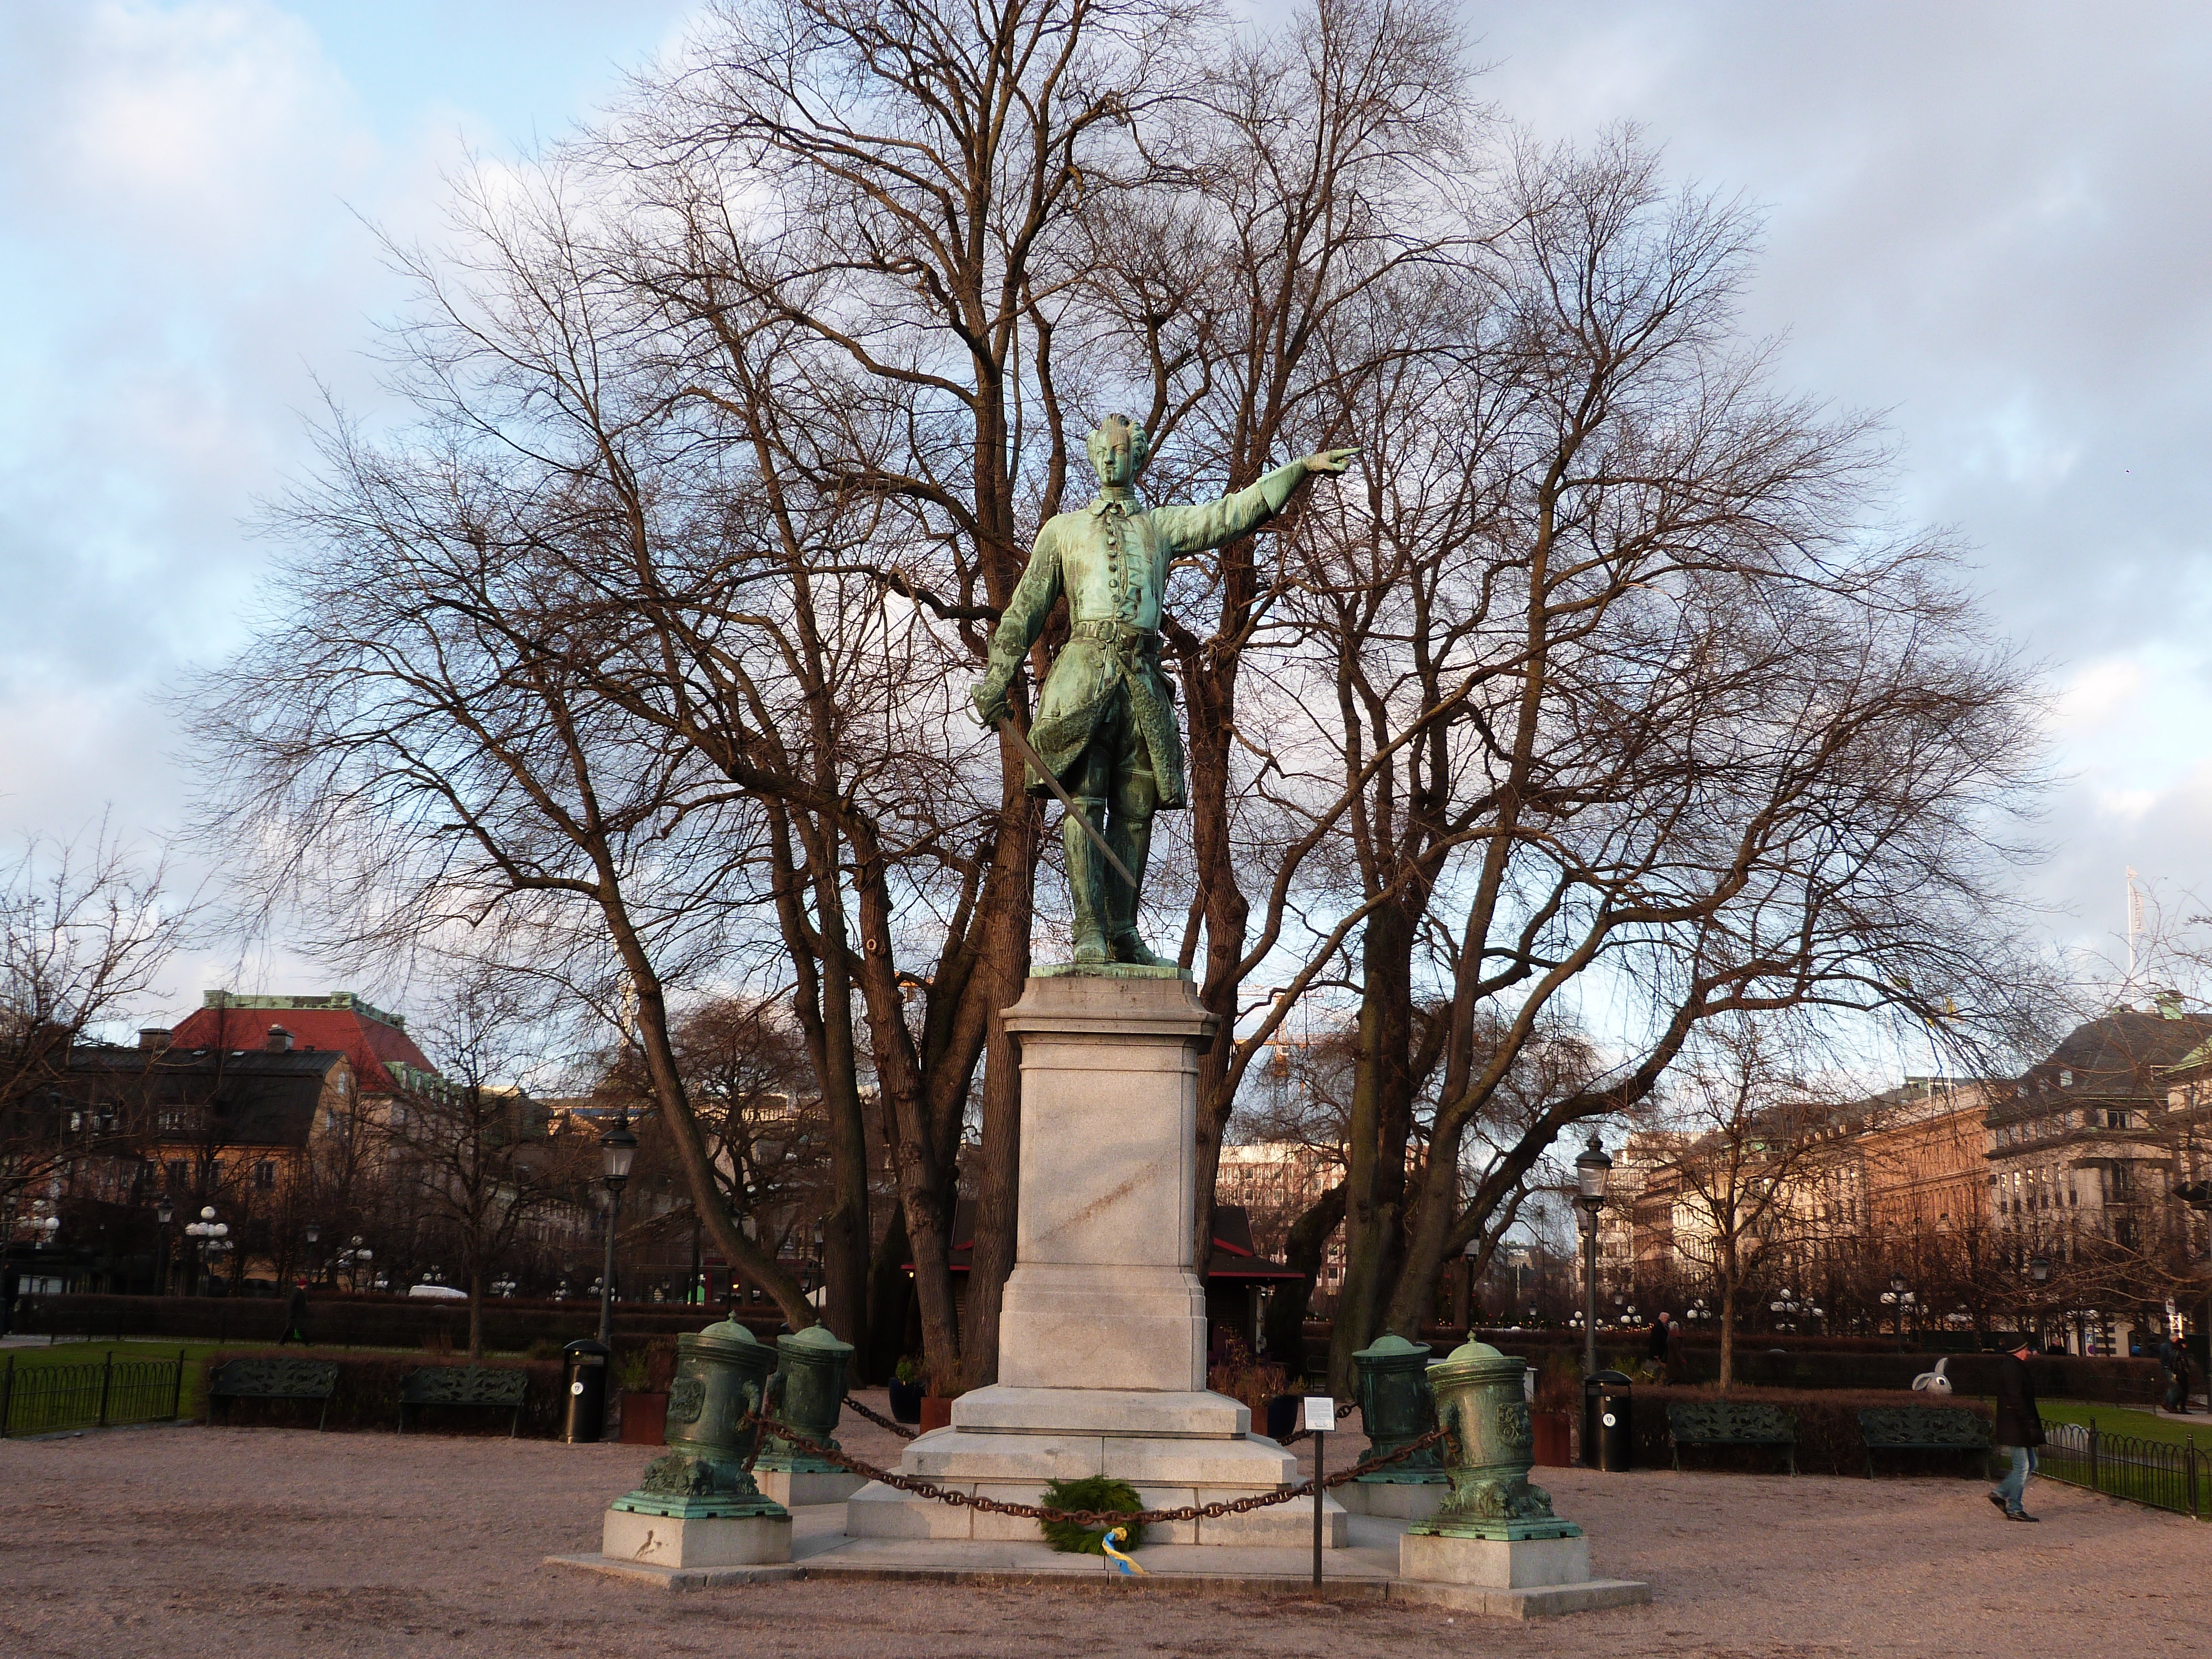 Statue of Charles XII in the Kungsträdgården or King's Garden